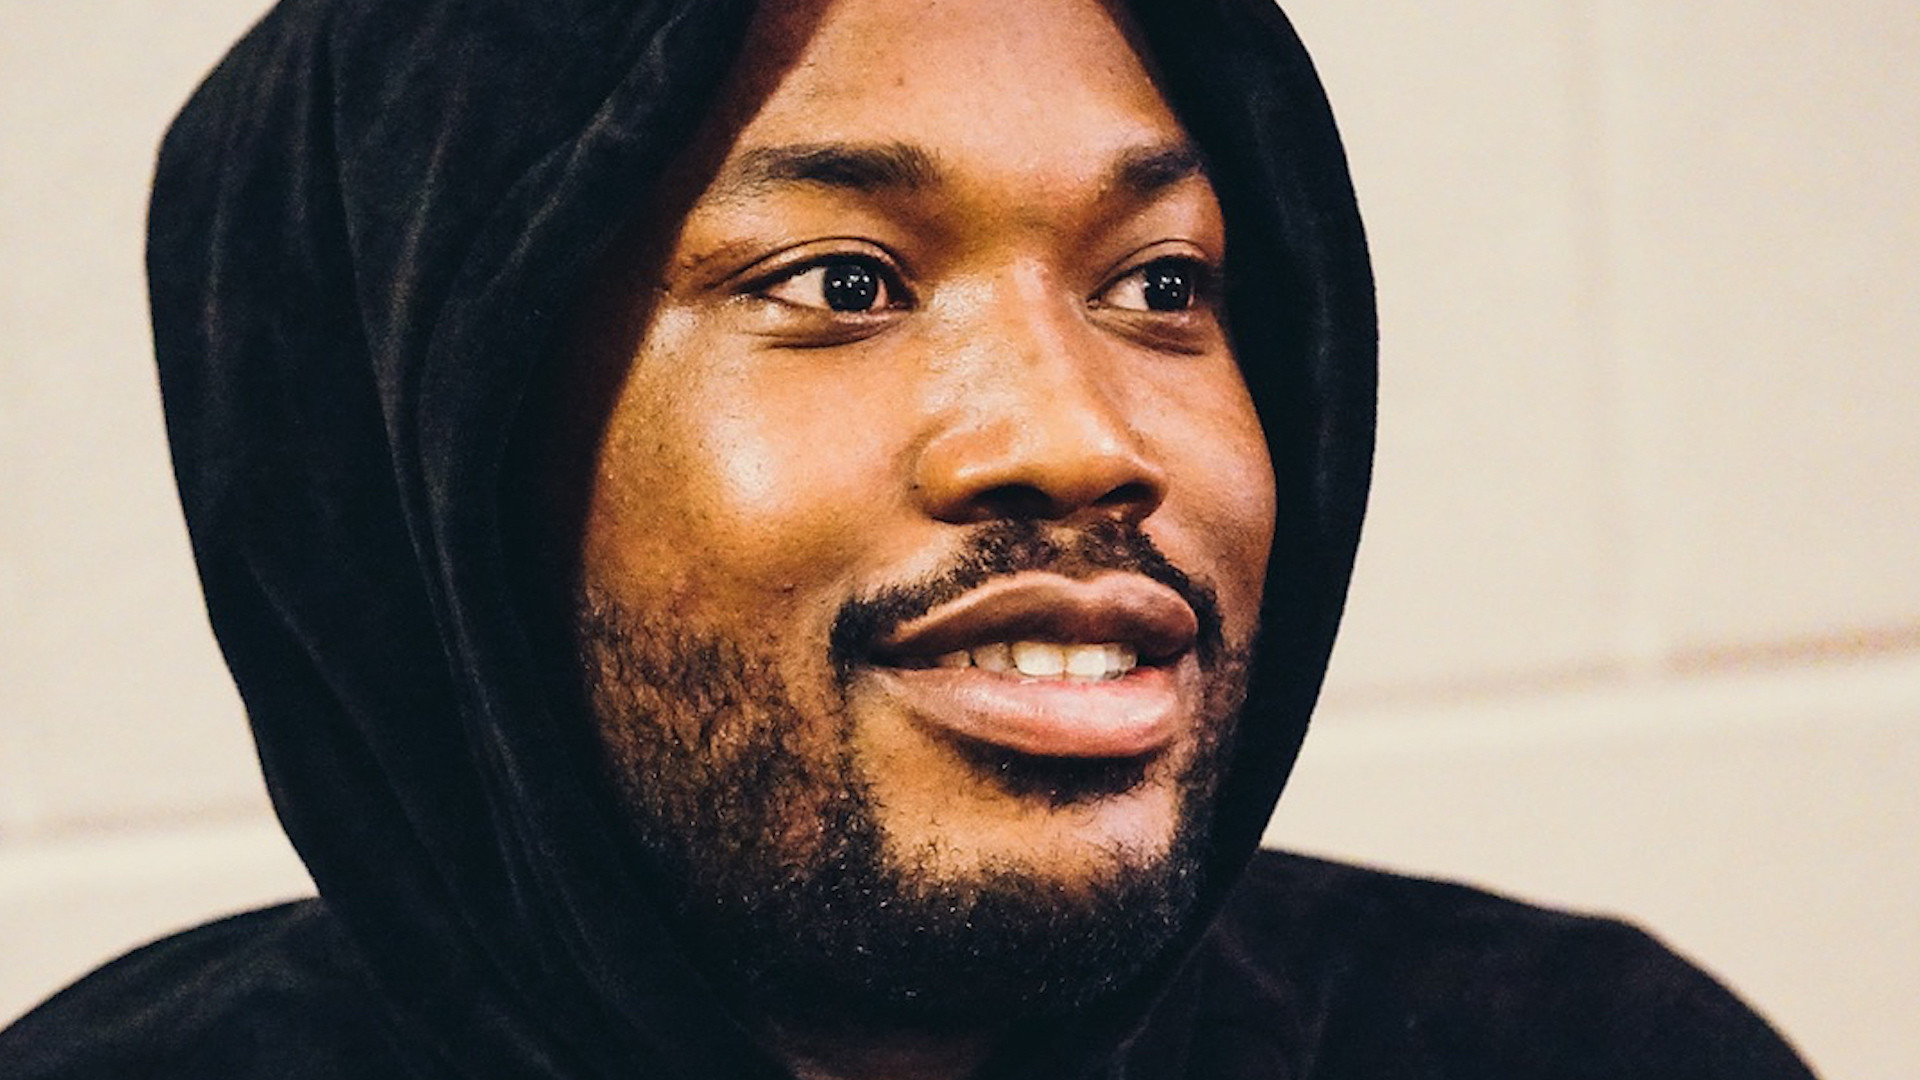 1920x1080 Meek Mill Donated $10,000 to At-Risk Youth While in Prison